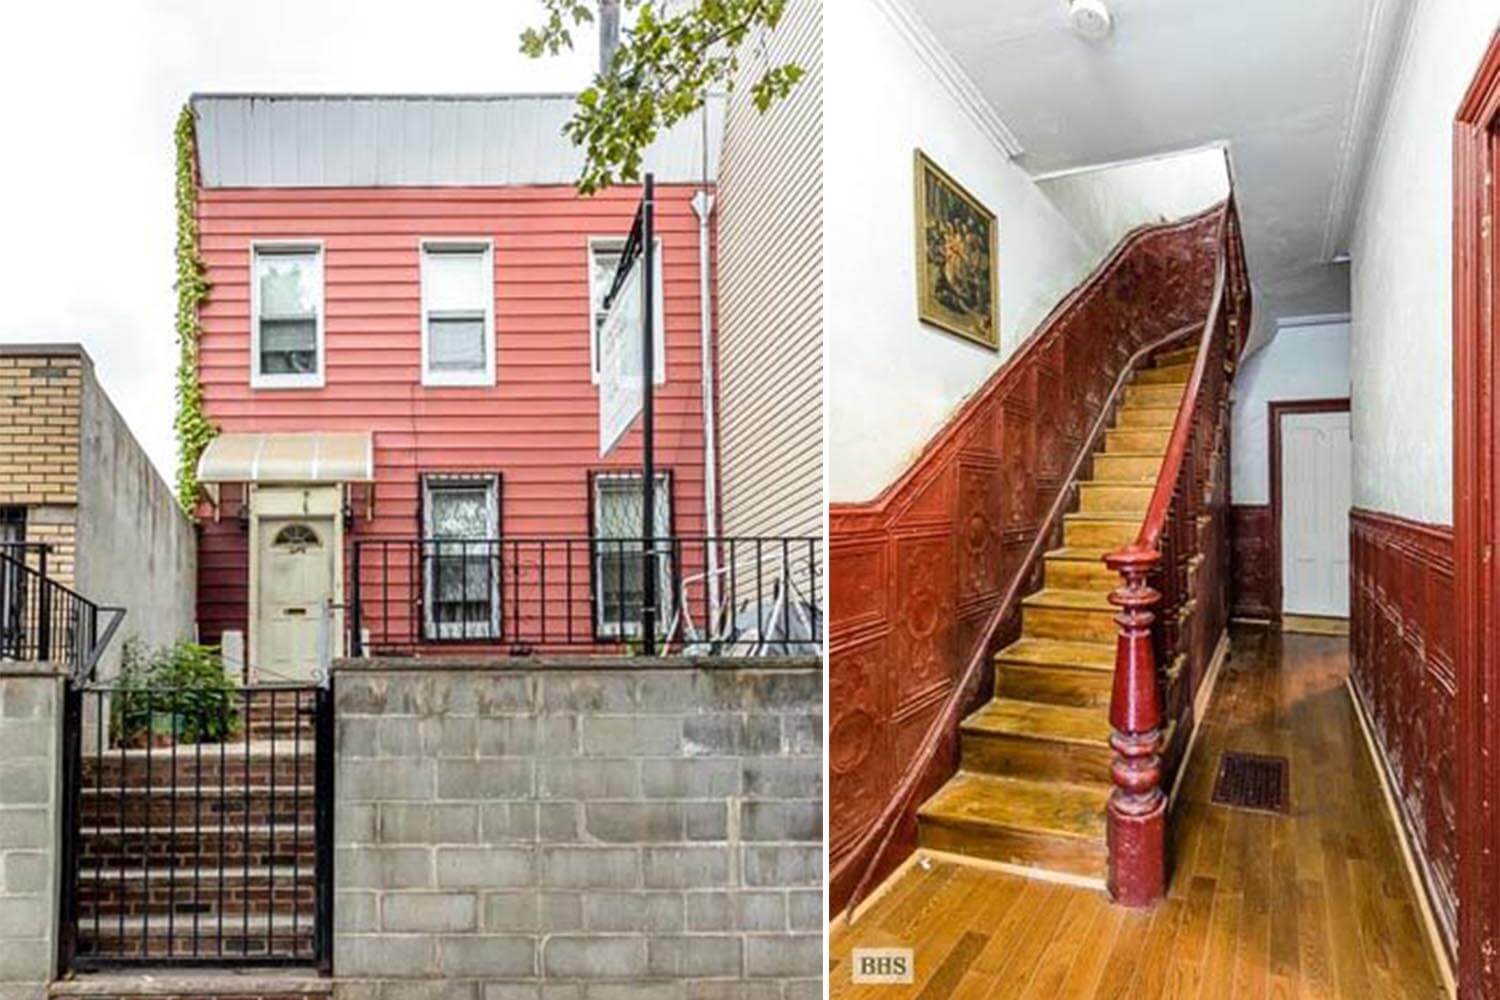 Brooklyn homes for sale